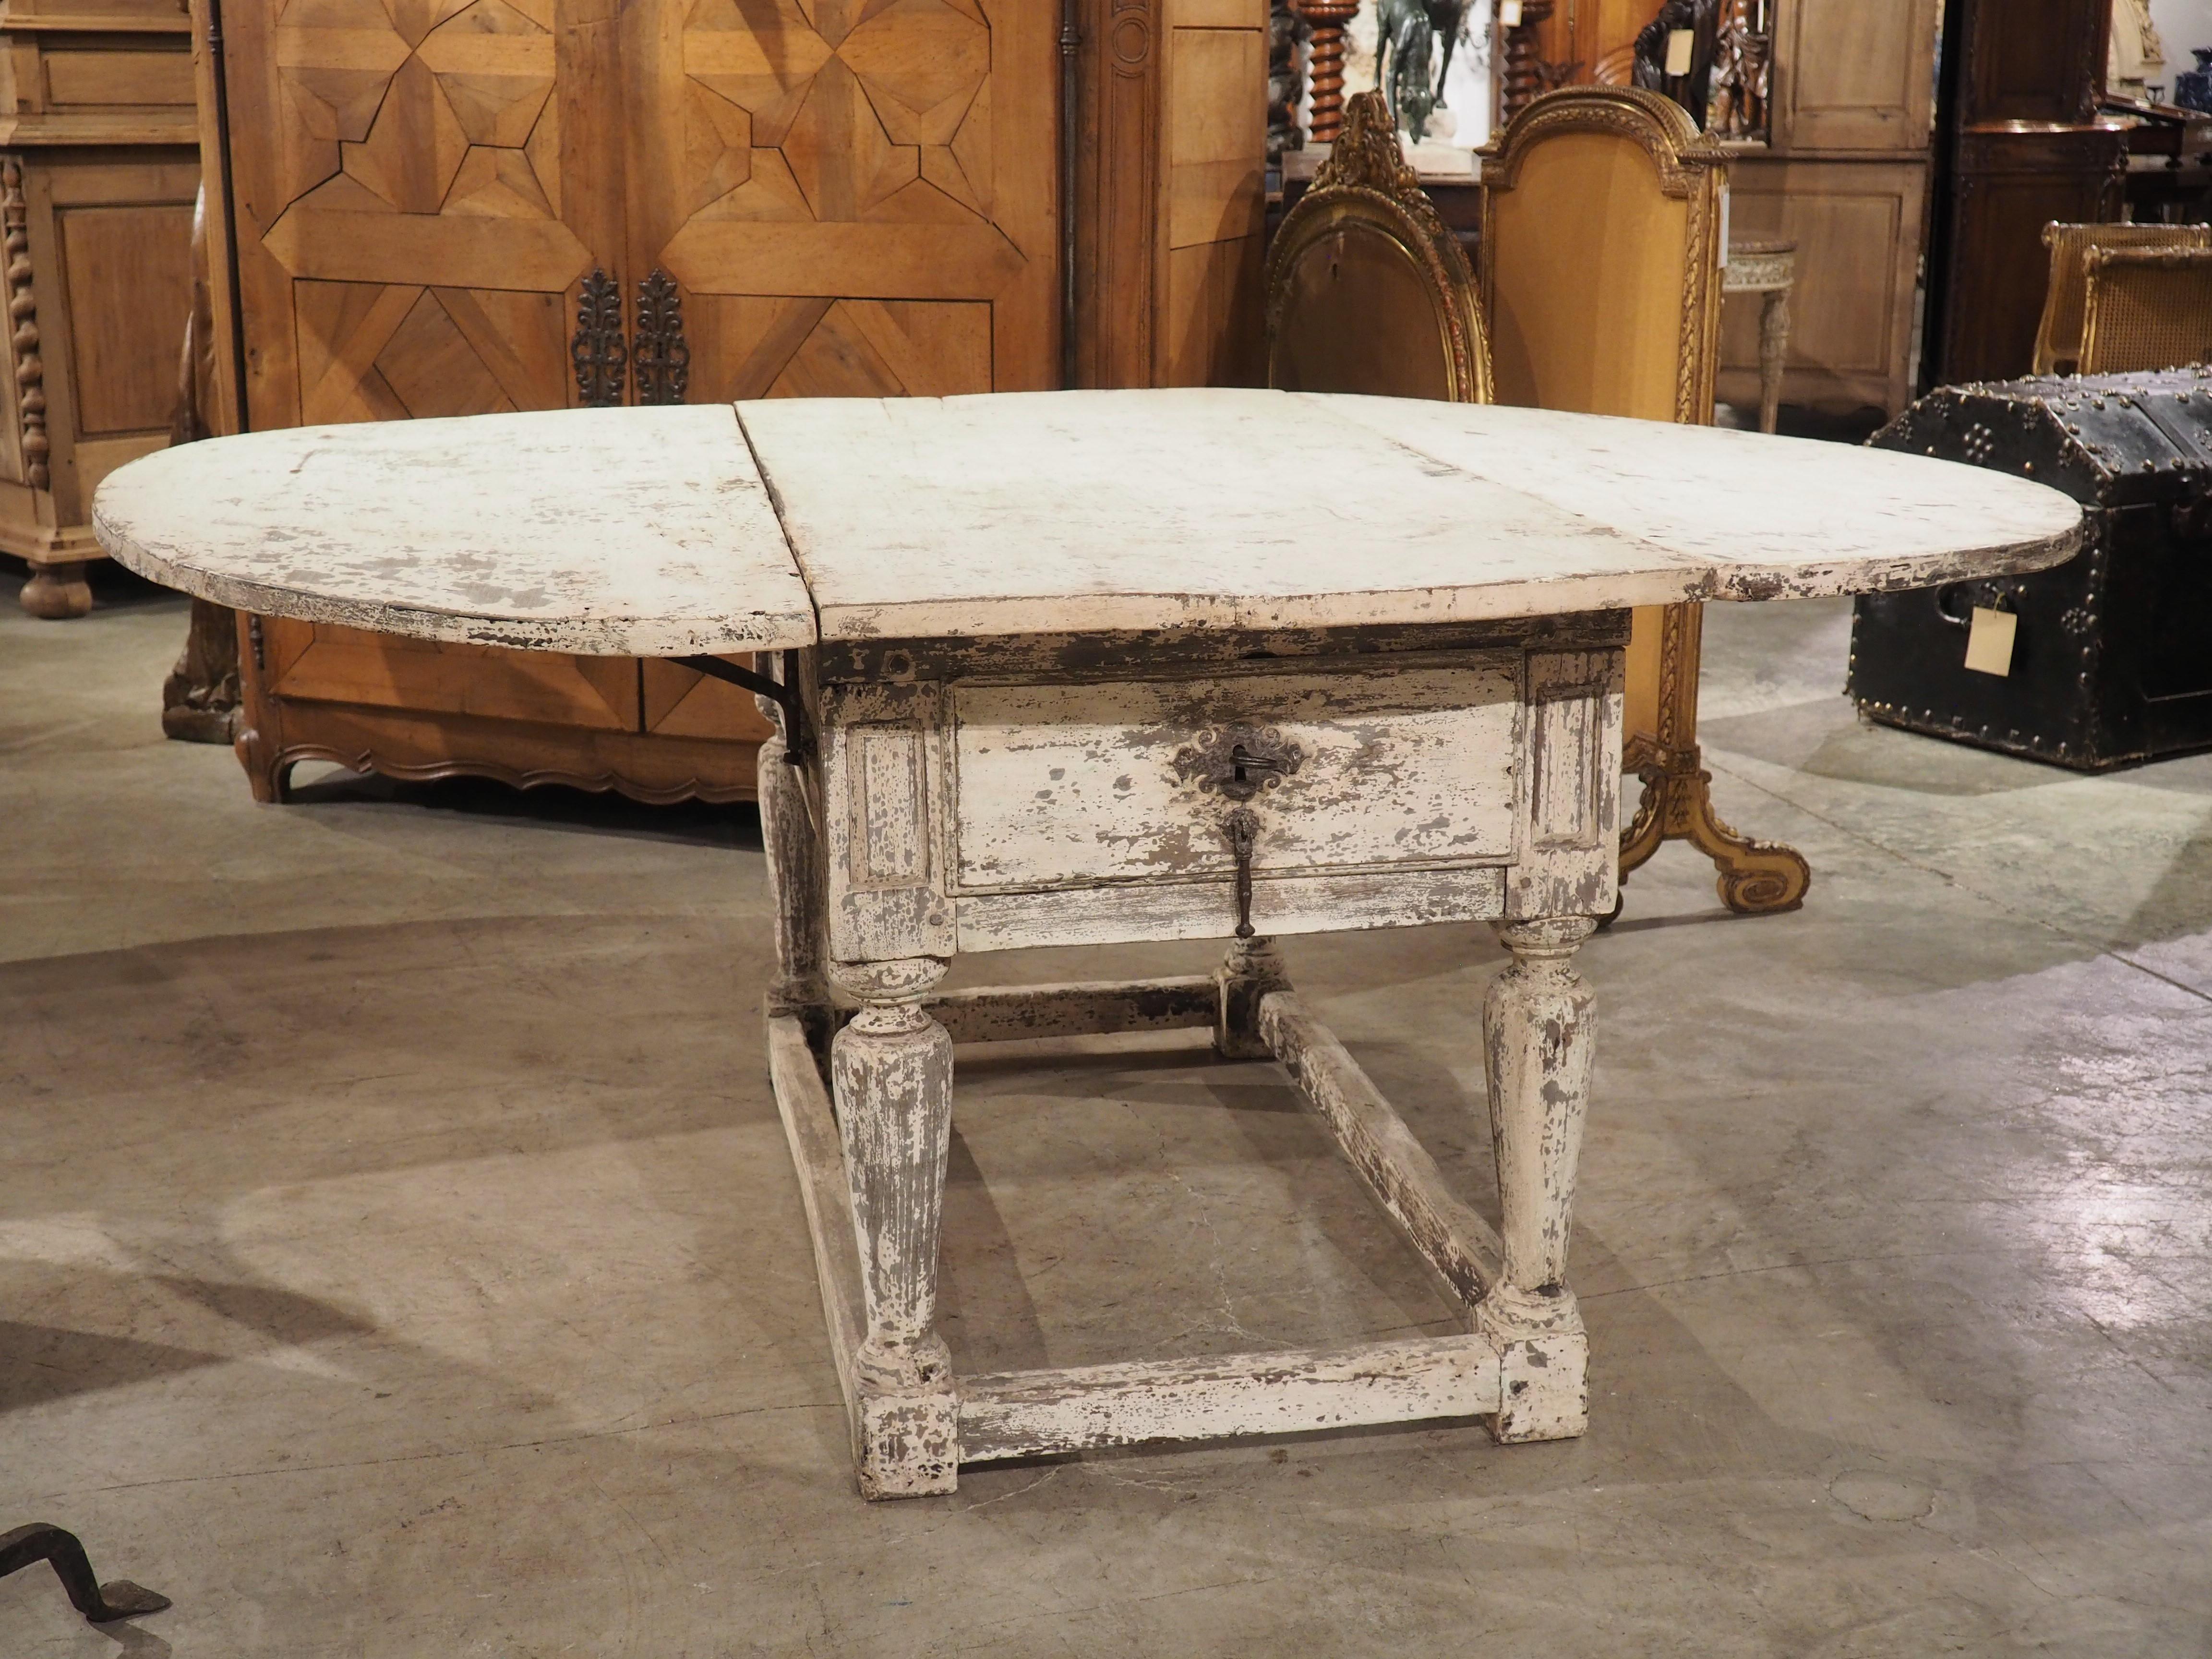 A wonderful and unique table from Italy, this painted oval drop-leaf table has two drawers on the long sides, both with functioning locks (unlocked by a single key).  The oak was hand-carved in the 1600s, with the distressed white finish being added